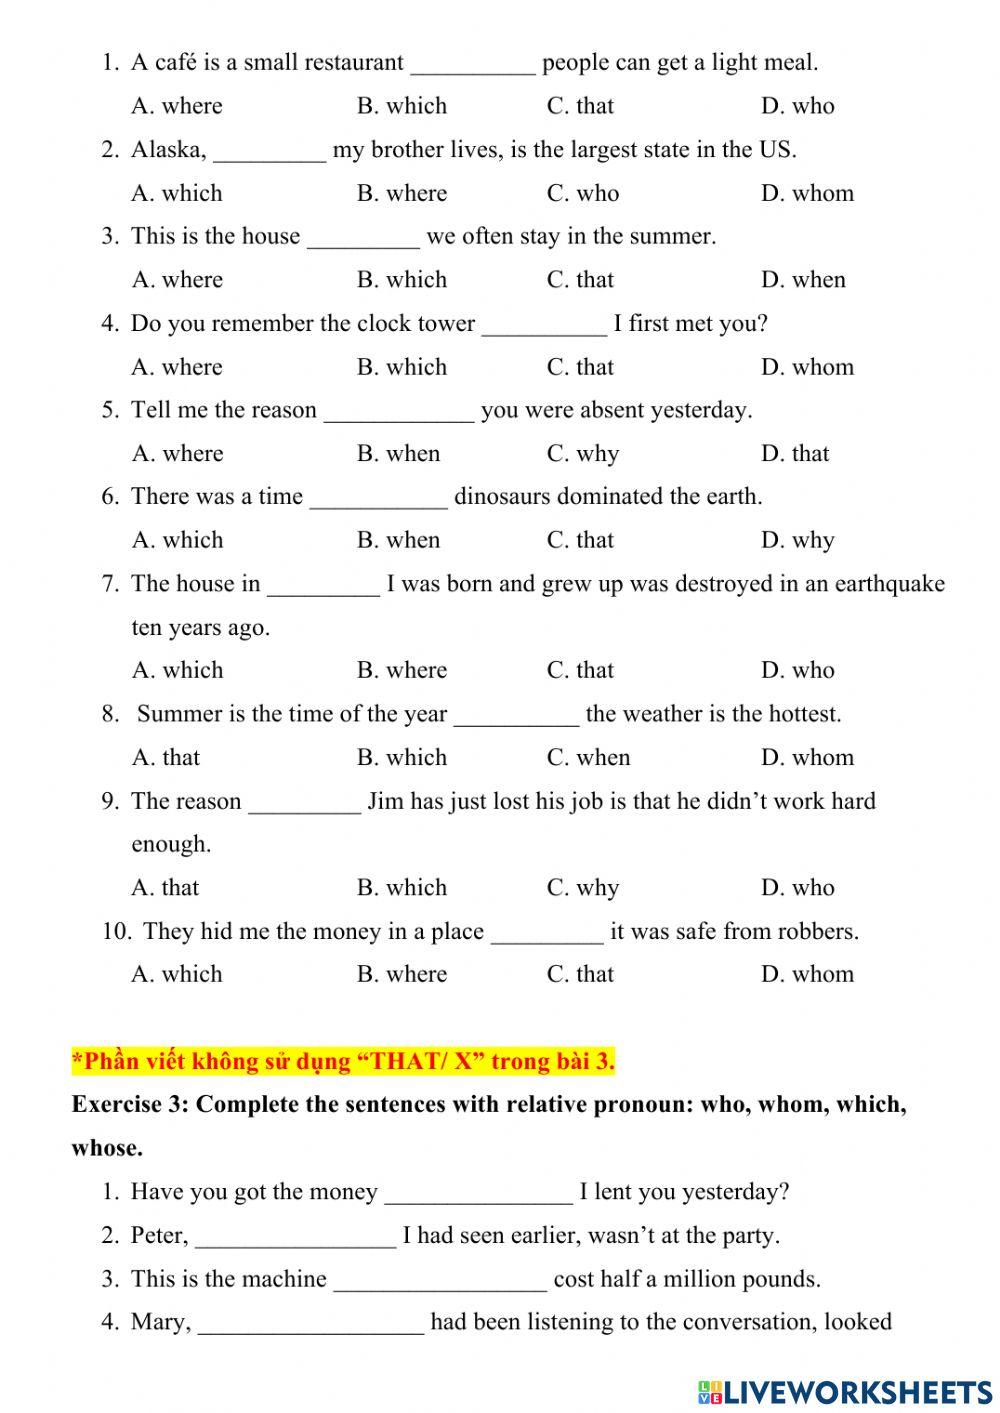 G9 - Relative clause (cont.)